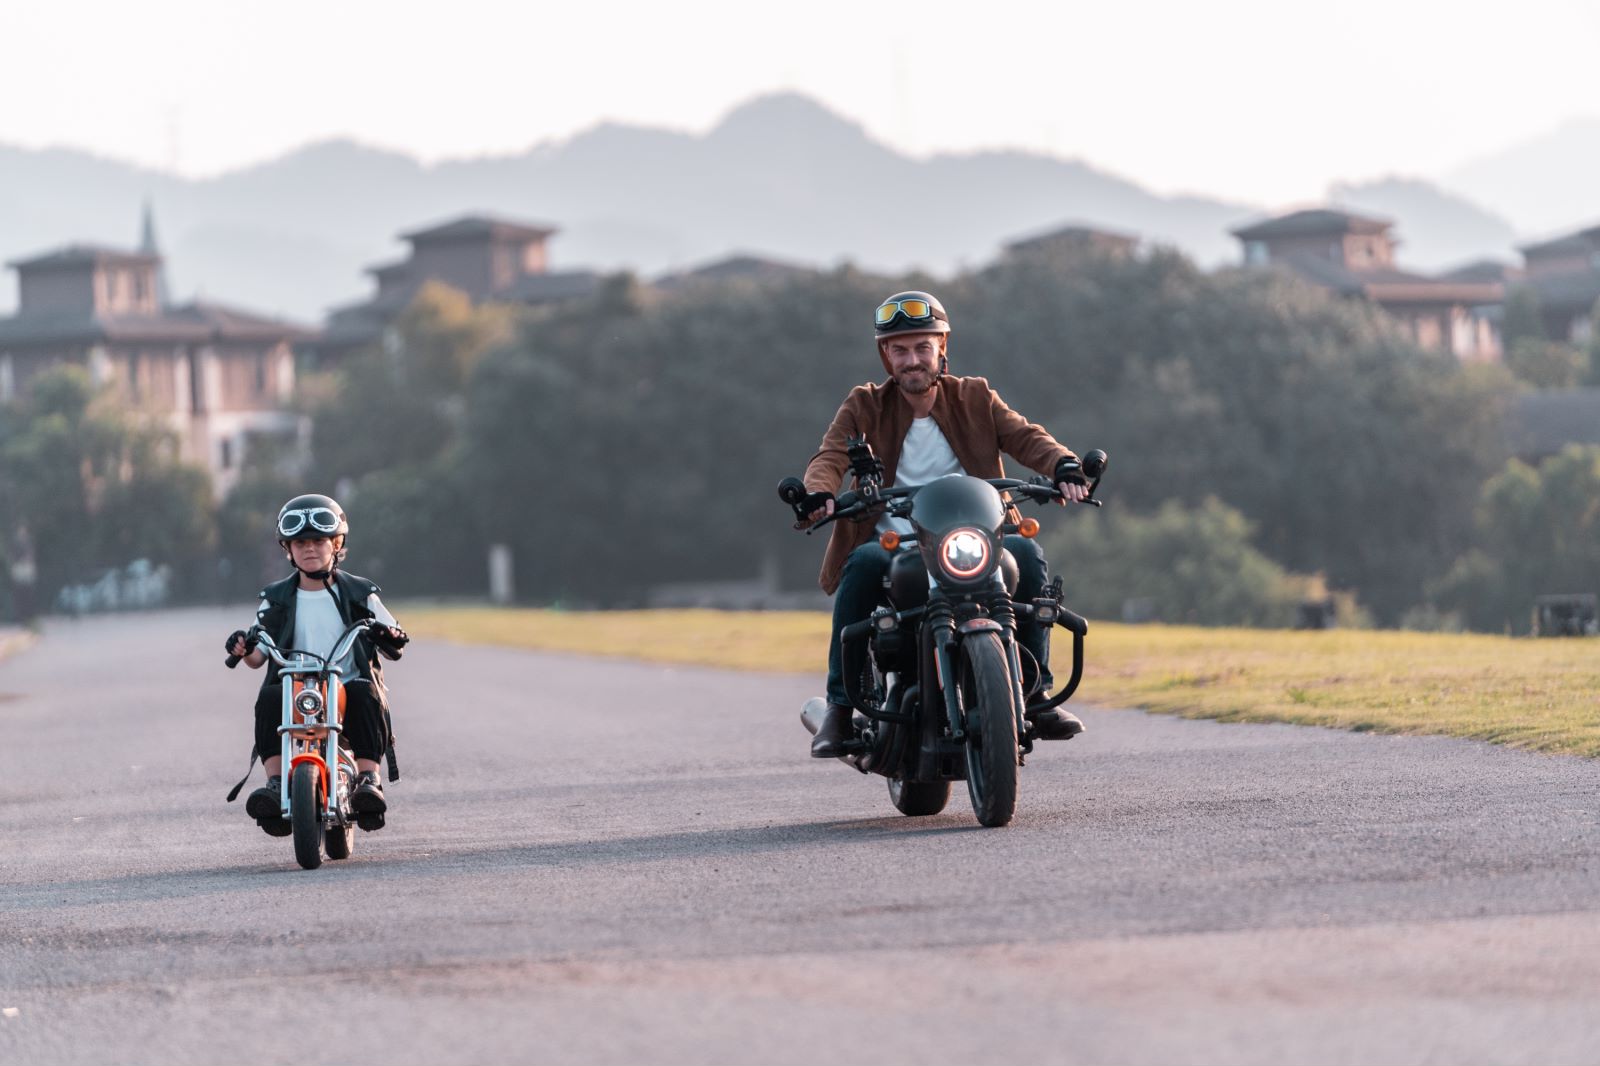 Riding A Mini Motorcycle Can Improve A Child's Concentration